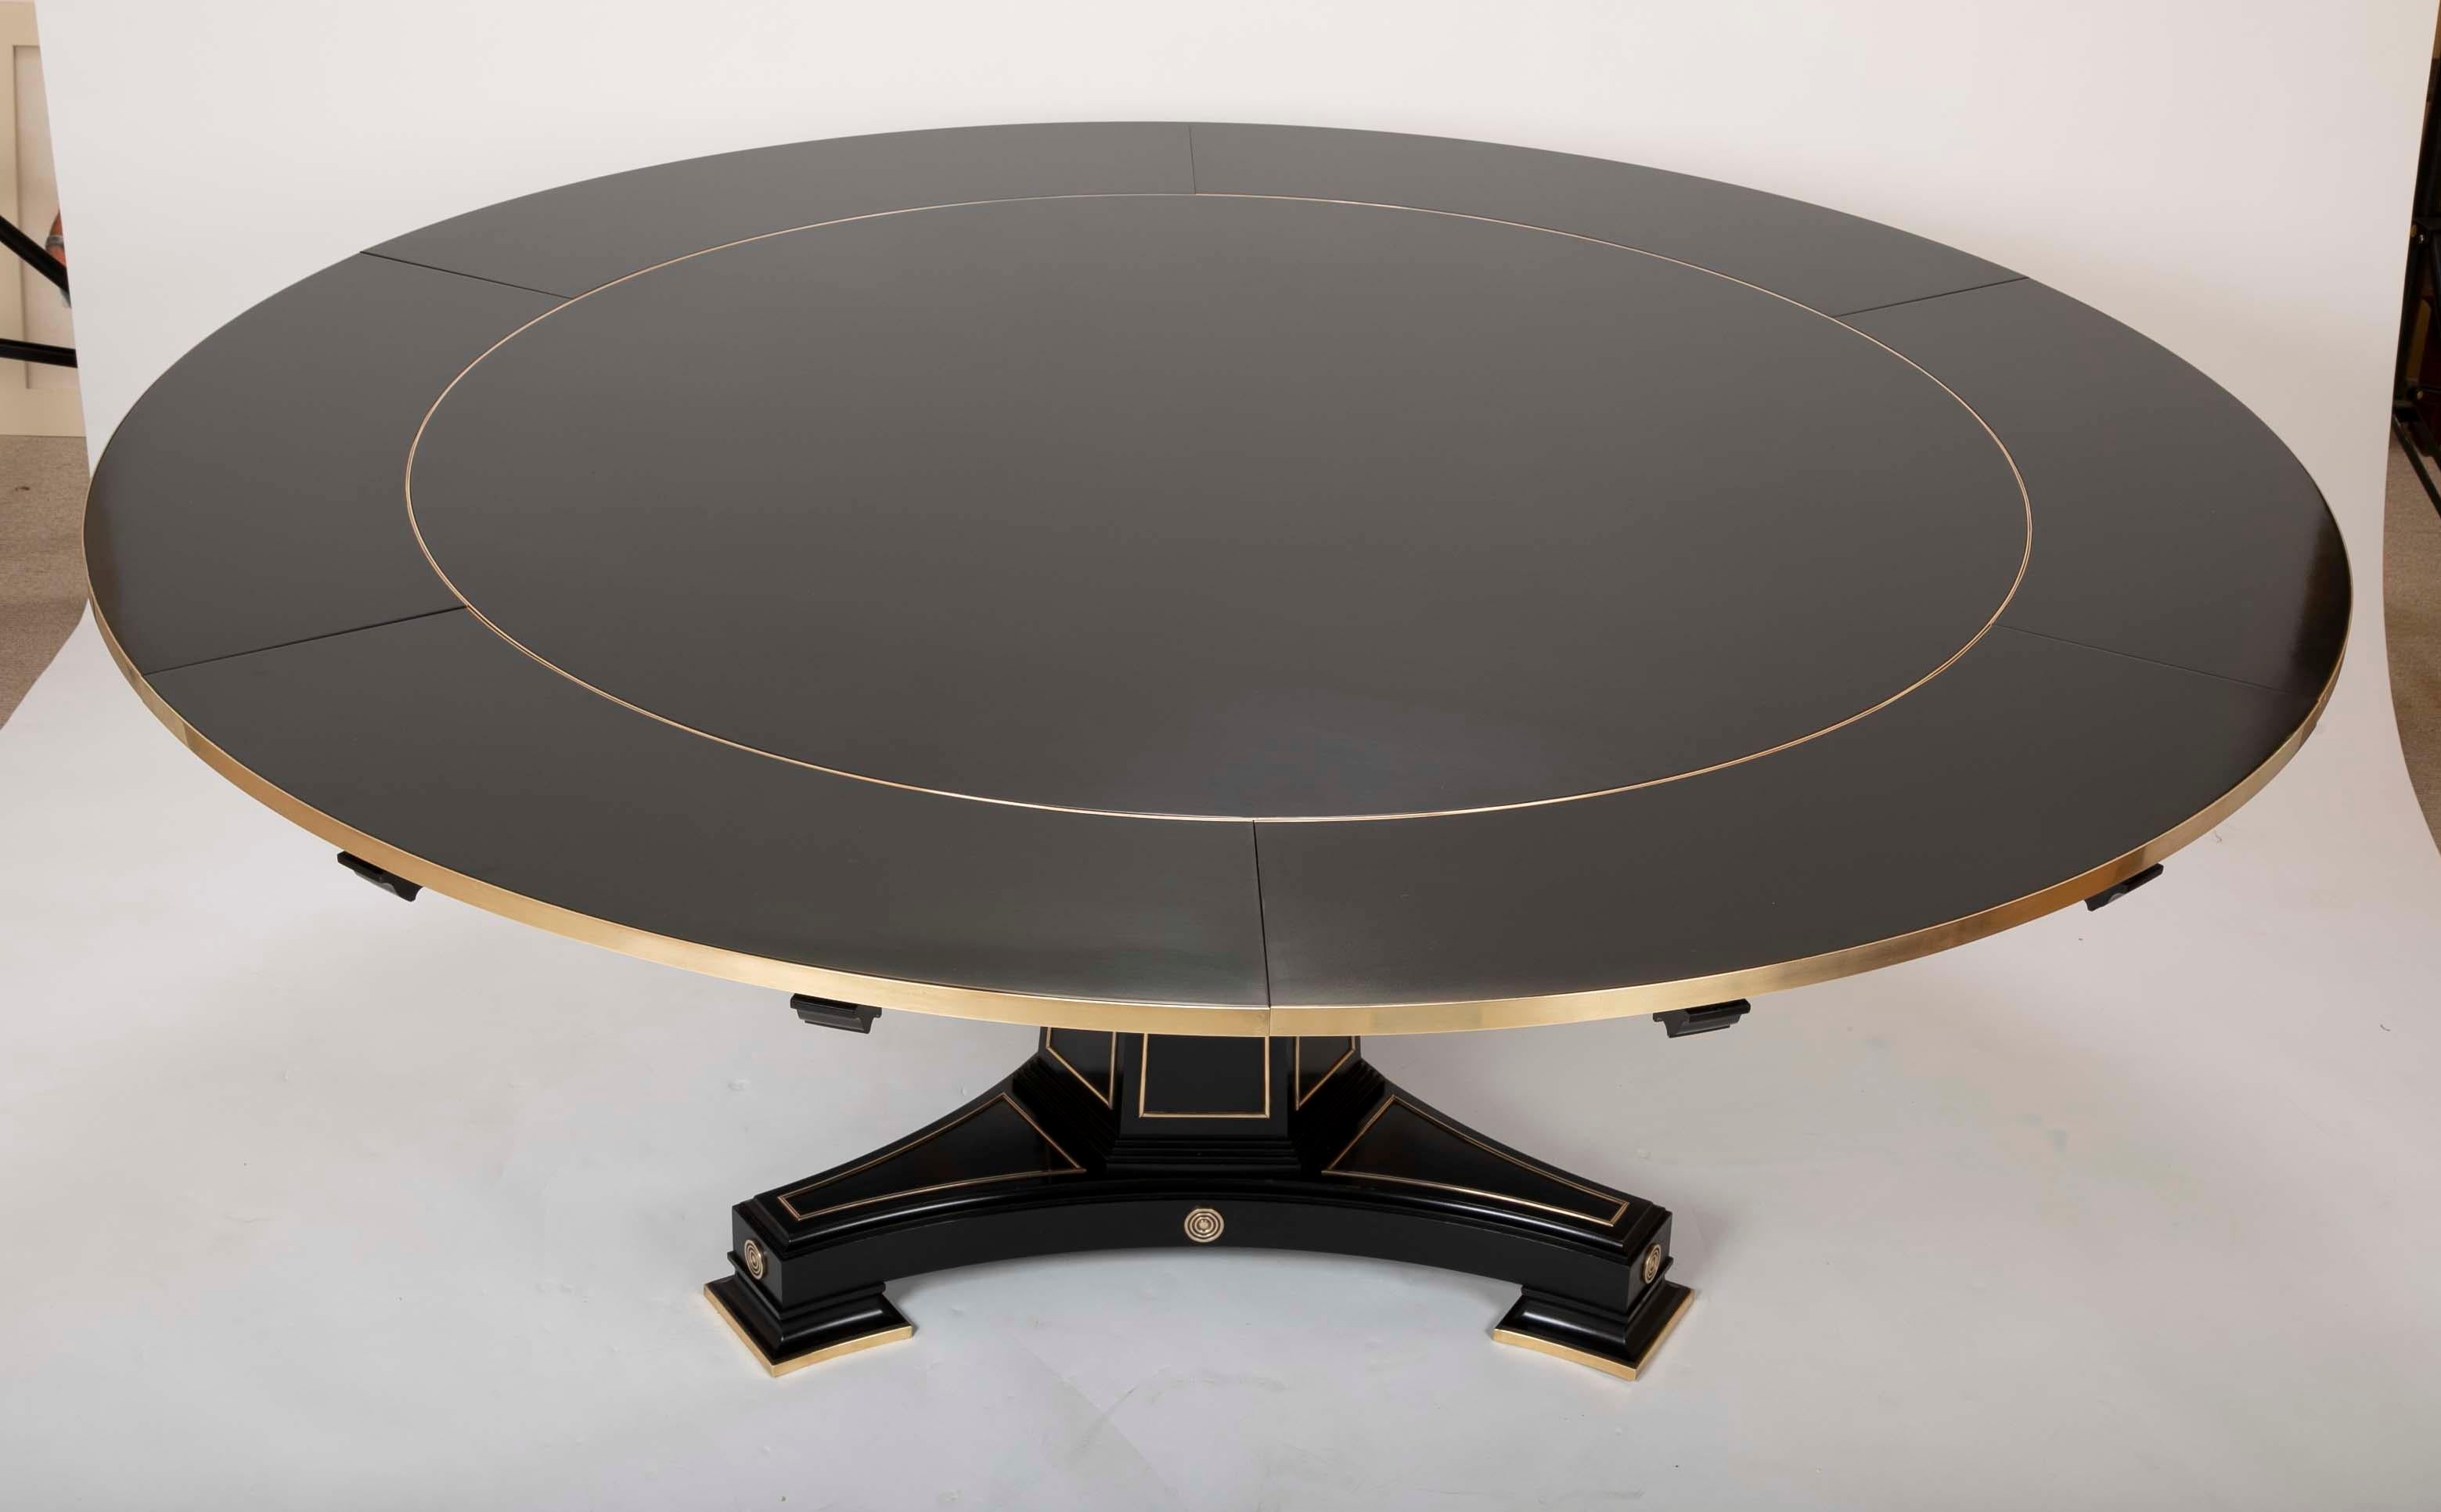 A modern ebonized expandable dining table in the Empire style. Designed by David Linley, The table has a central brass banded round top that accepts 6 brass banded leafs raised over a central tripod pedestal. There are also tracery brass decorations